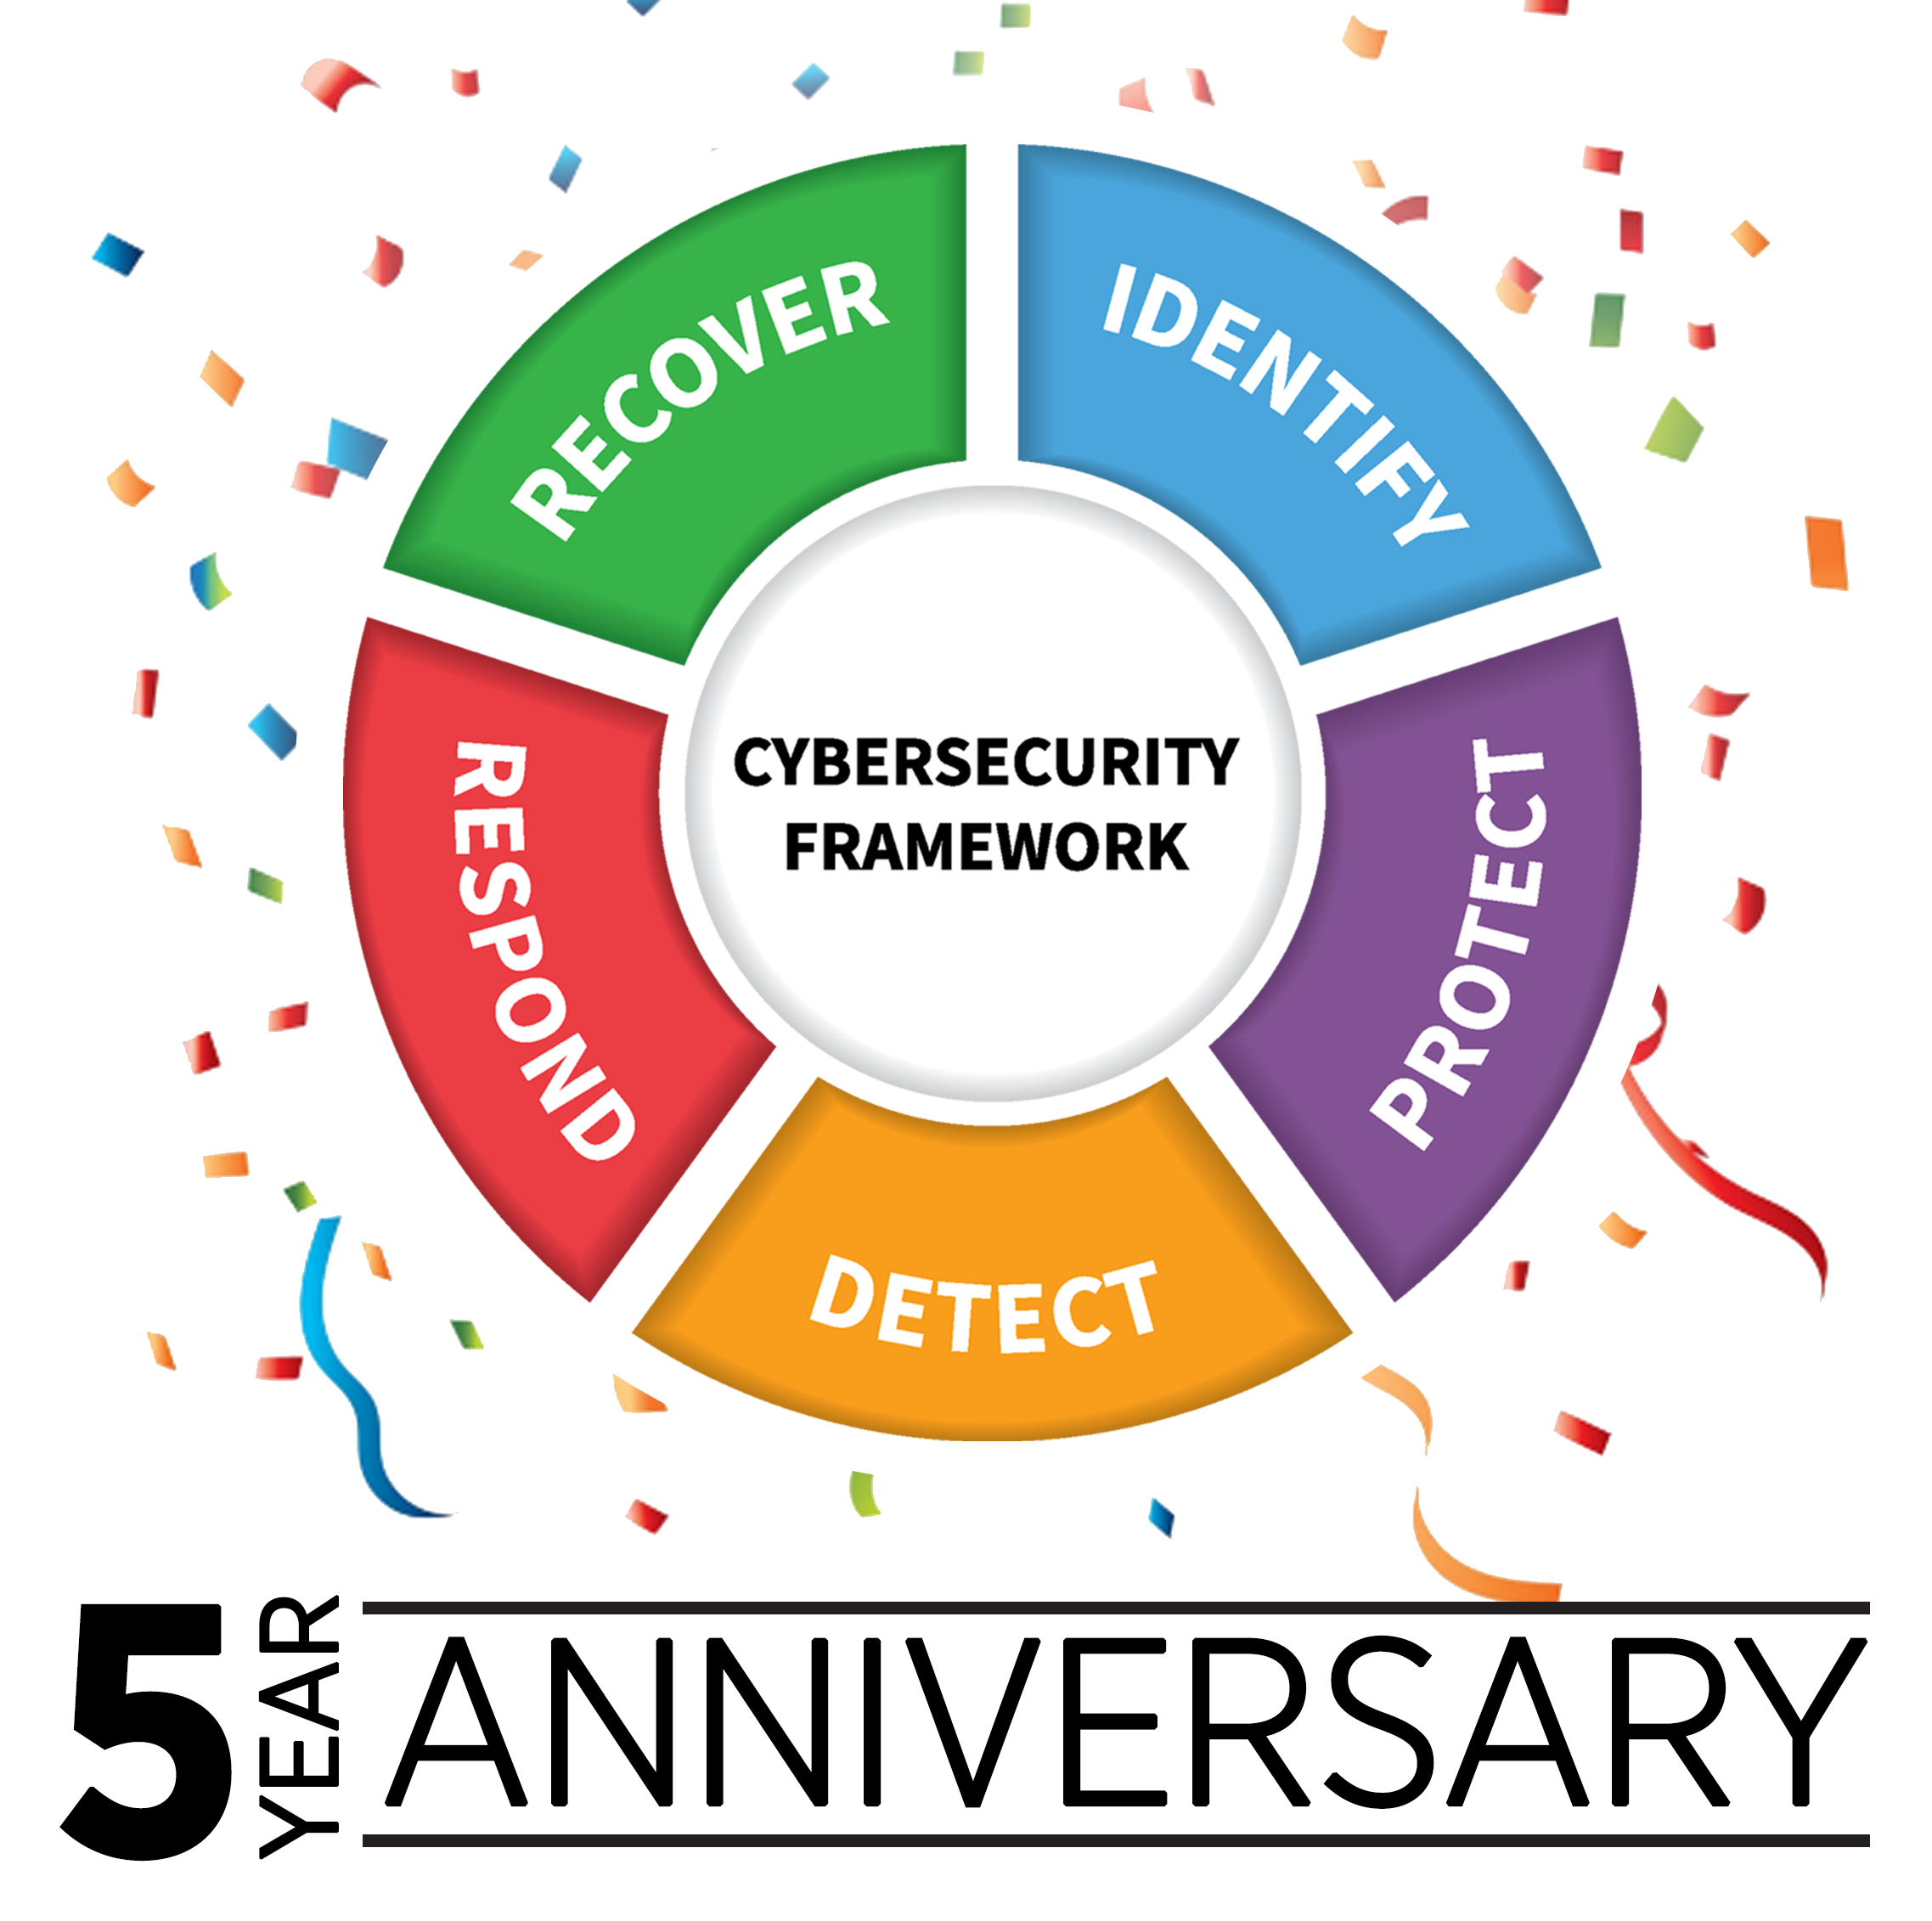 What is framework cybersecurity?